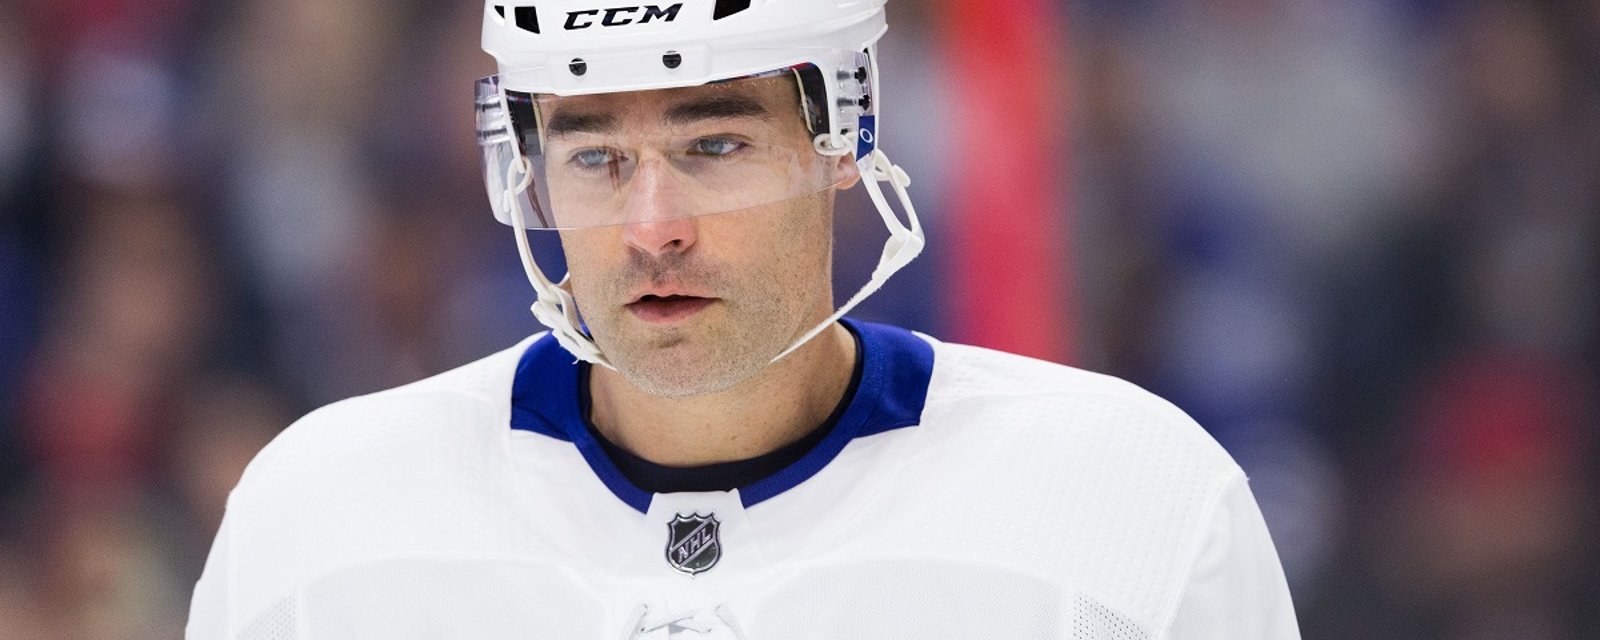 Breaking: Insider confirms Patrick Marleau is done in Toronto.